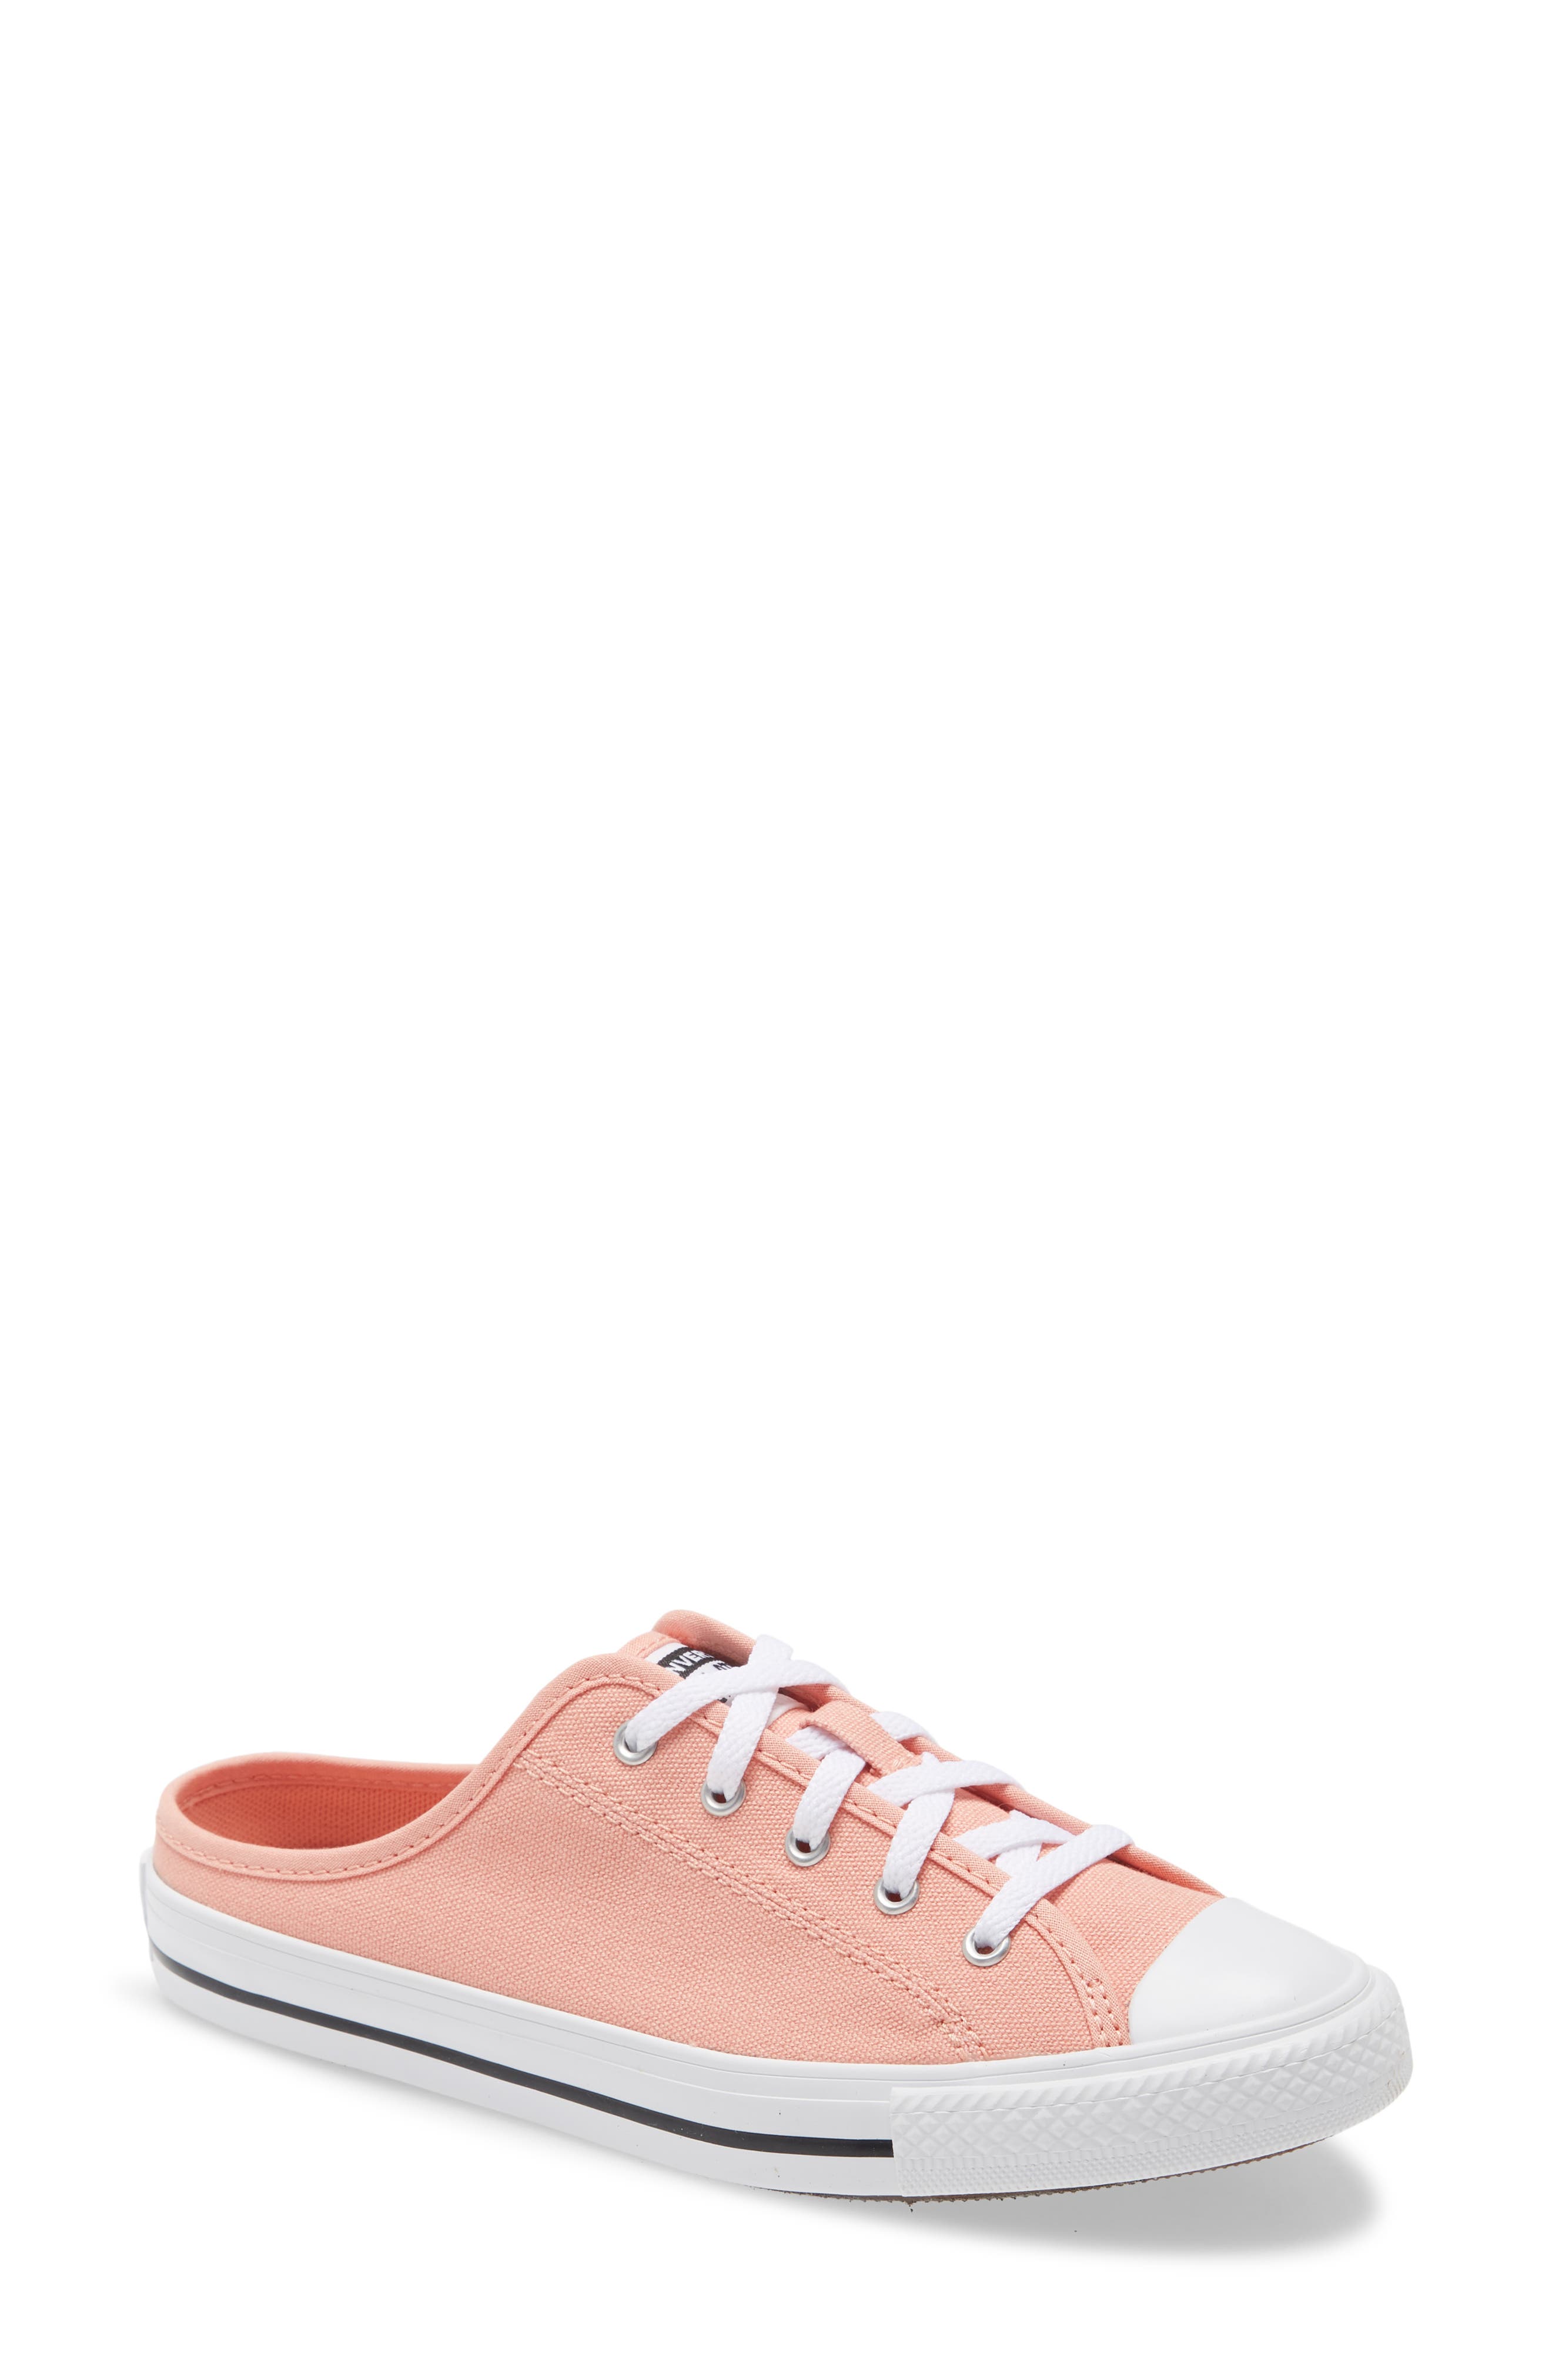 converse all star dainty pink